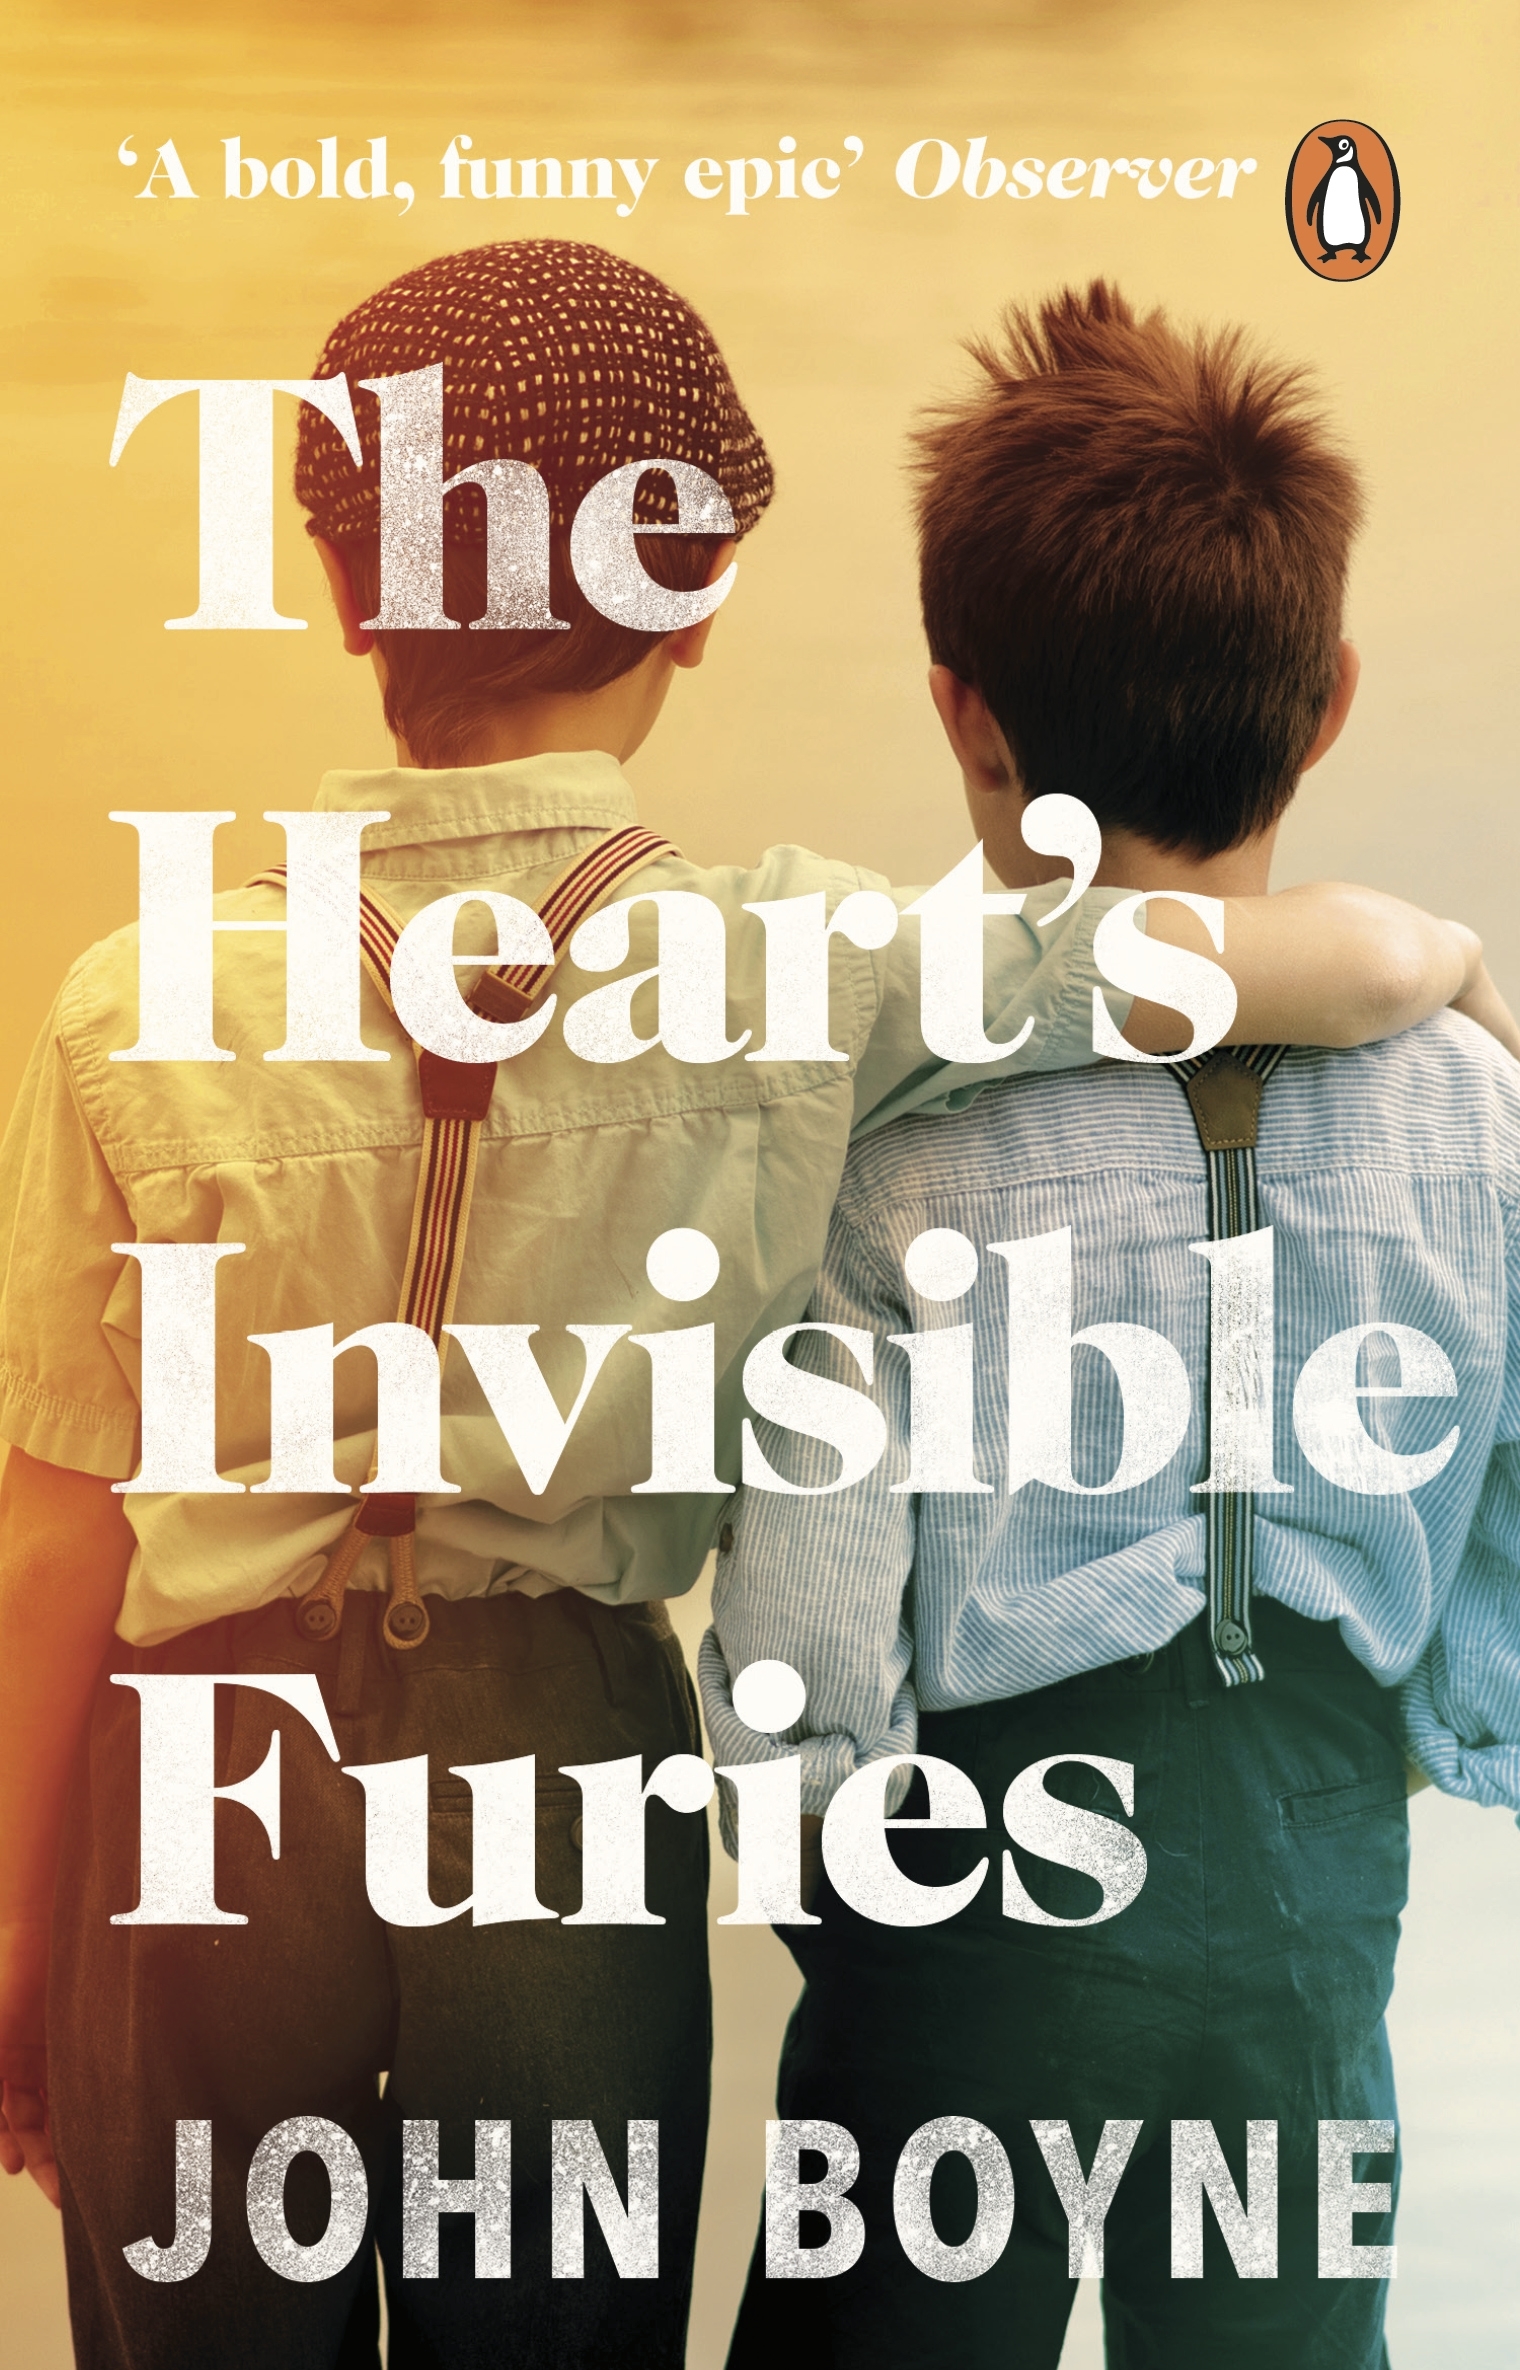 the hearts invisible furies